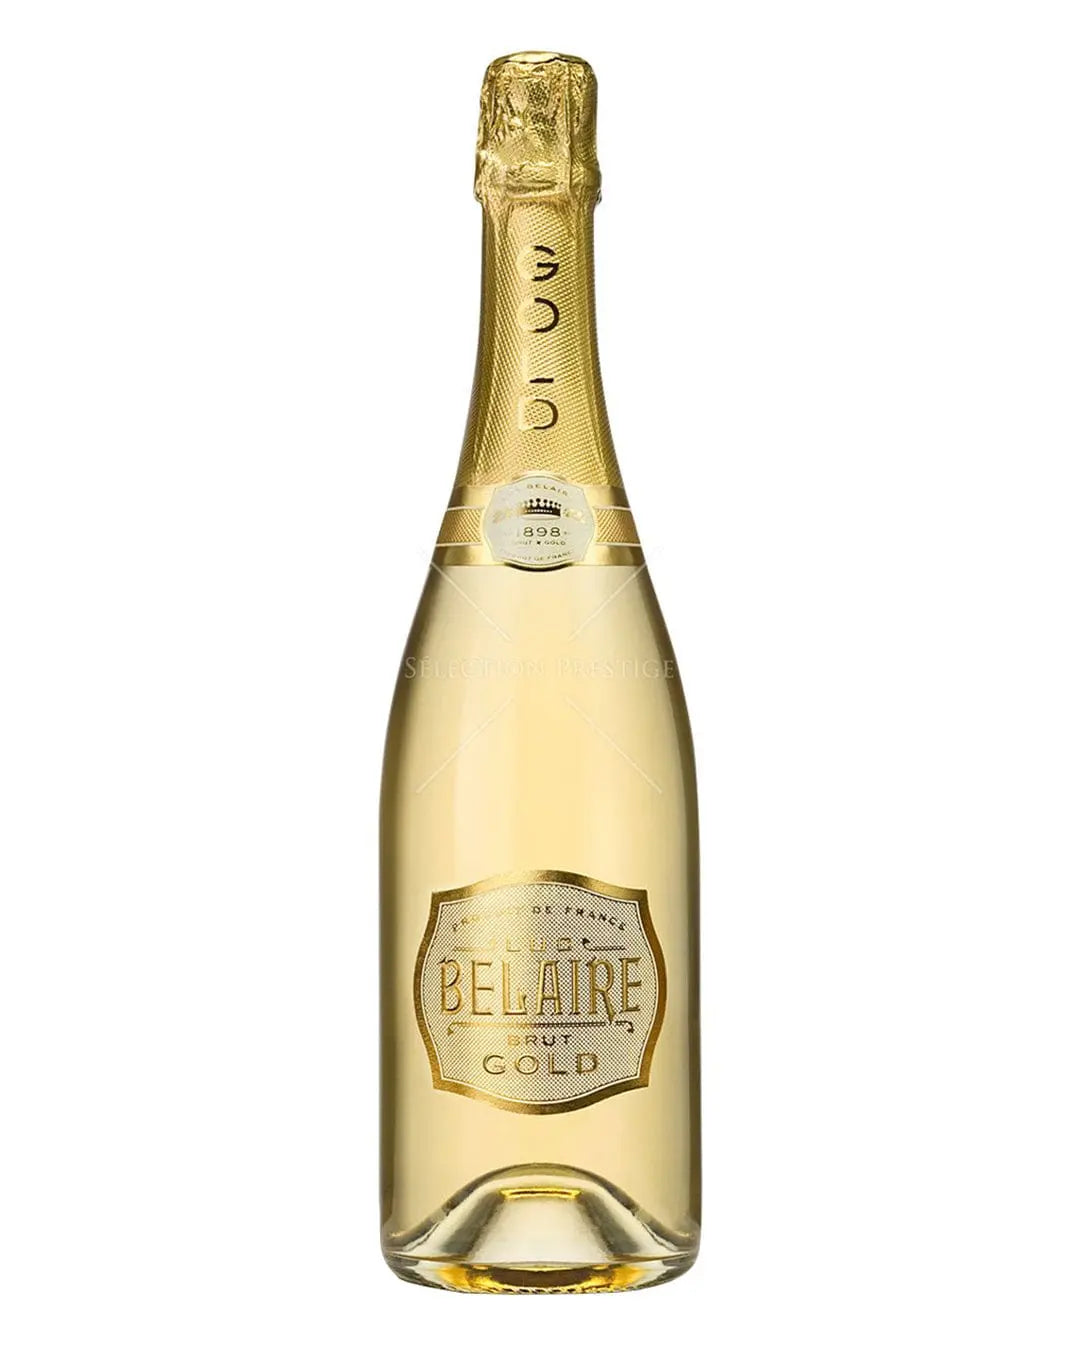 Luc Belaire Gold, 75 cl Champagne & Sparkling 813497007038